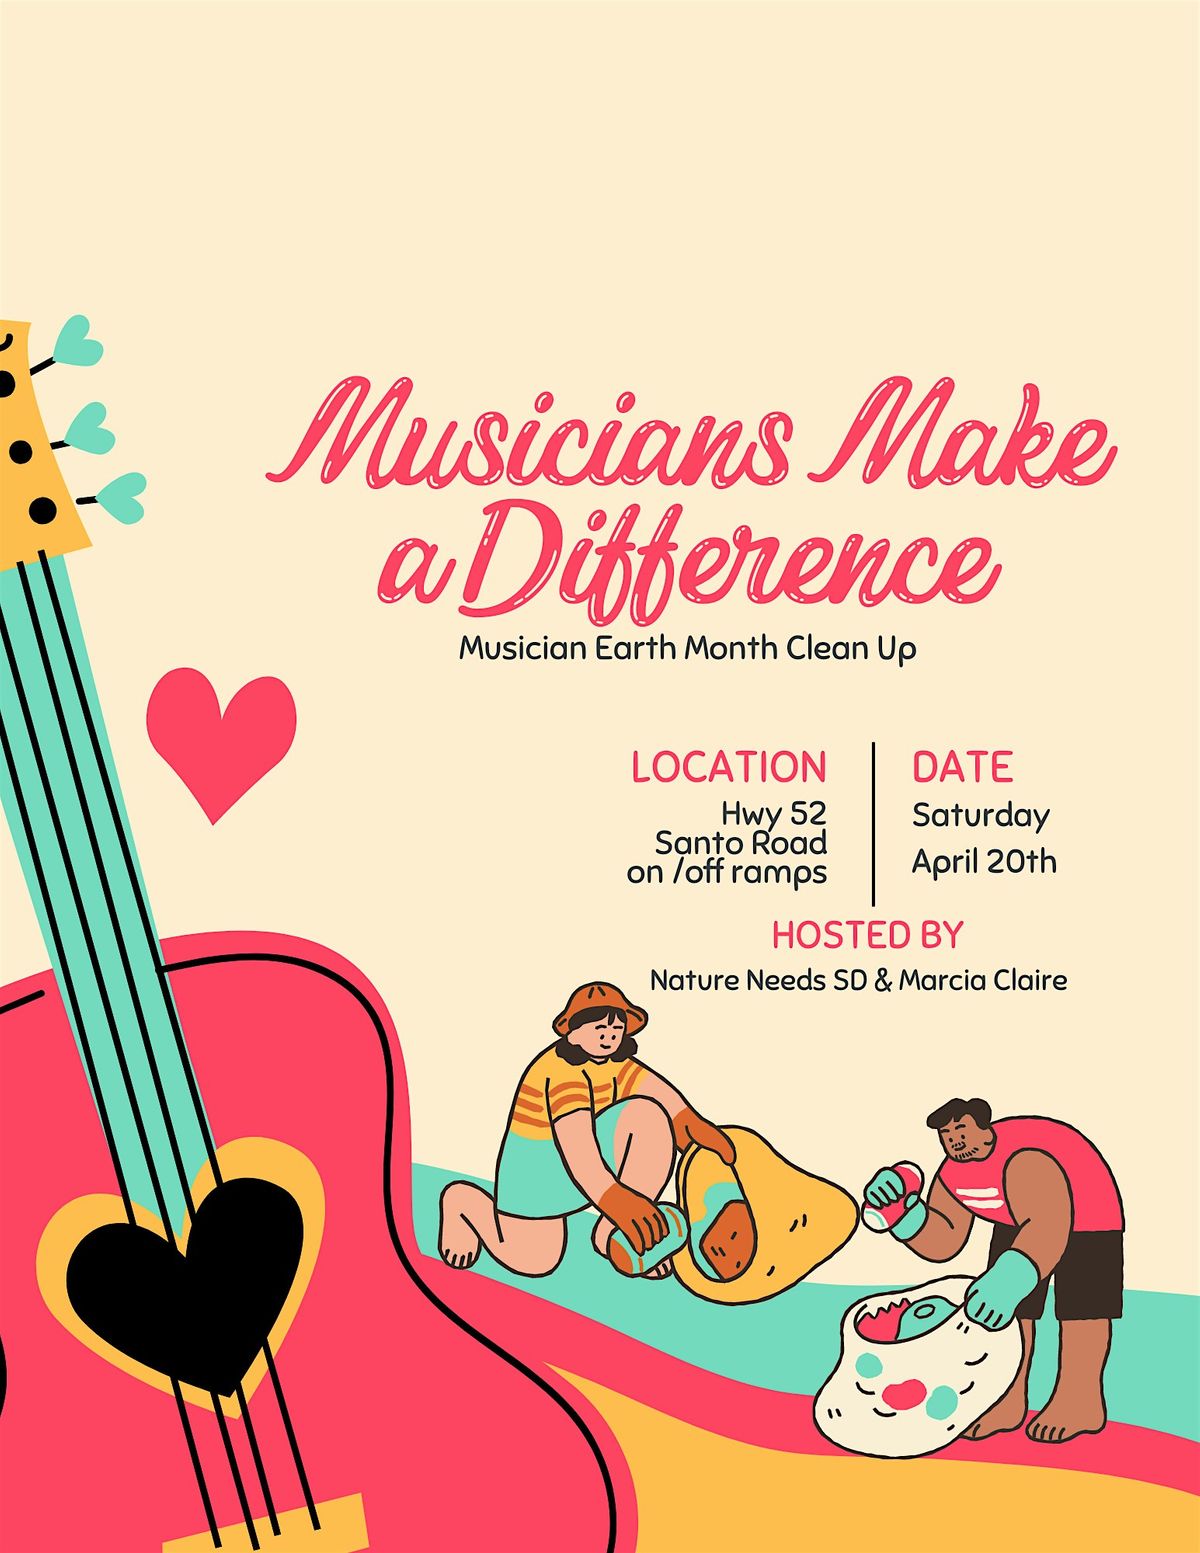 Musicians Make A Difference